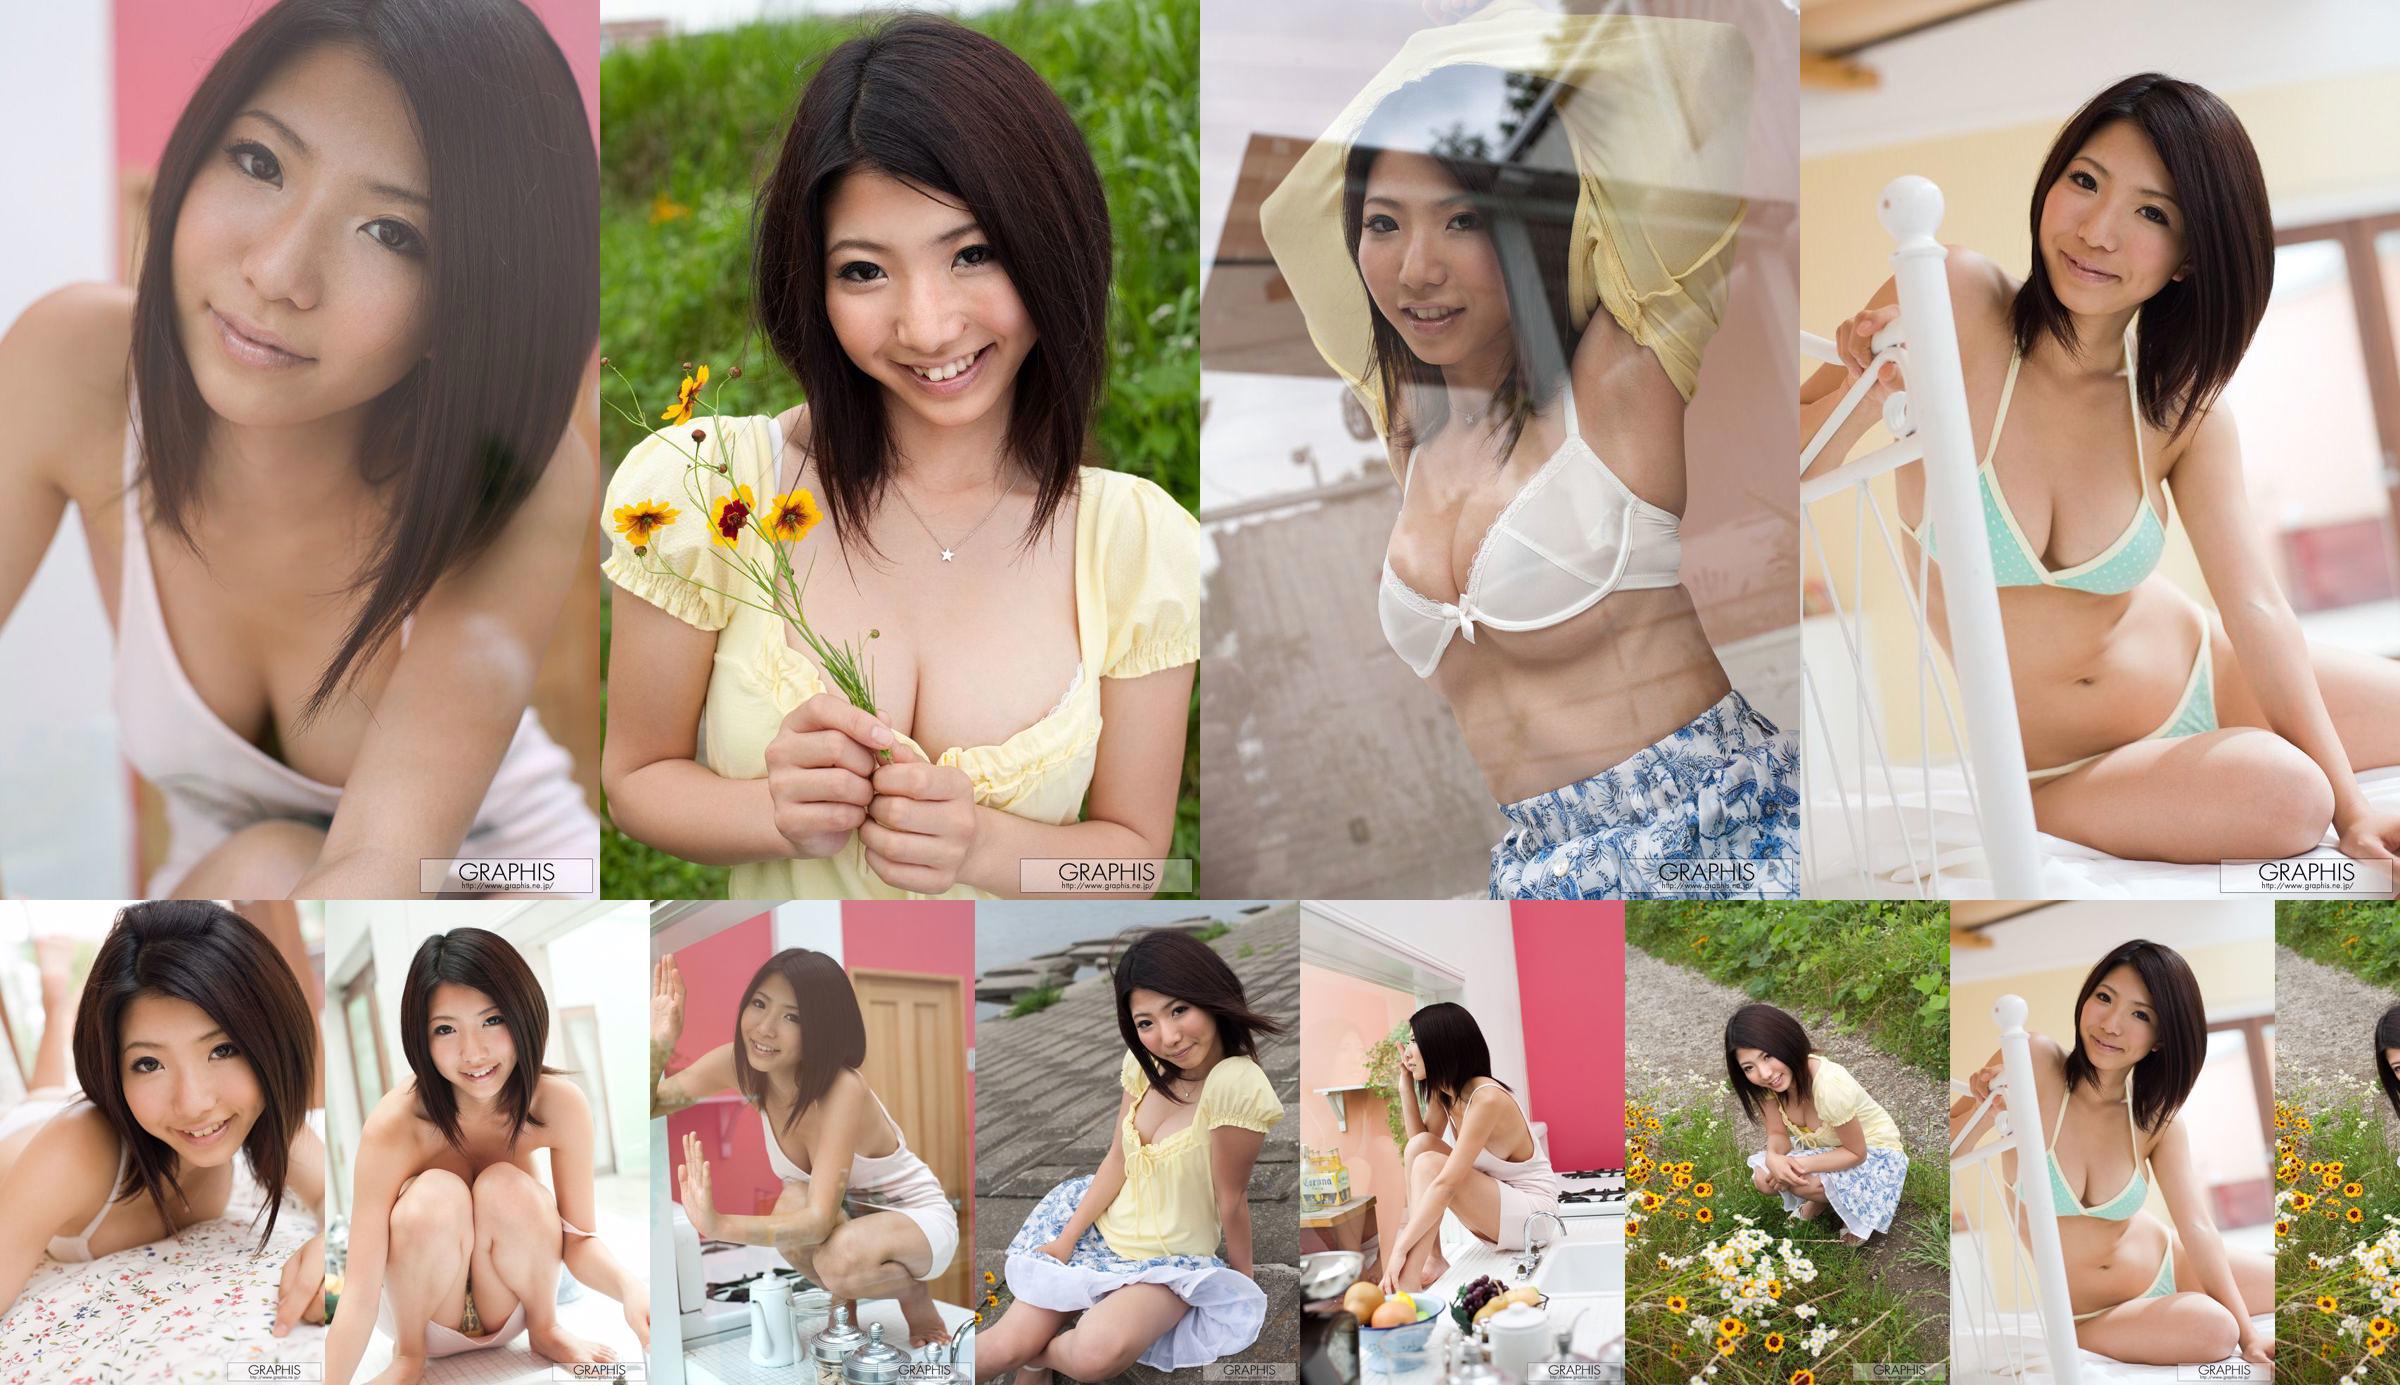 An Ann 《Simple and Innocent》 [Graphis] Gals No.4b254b Page 2